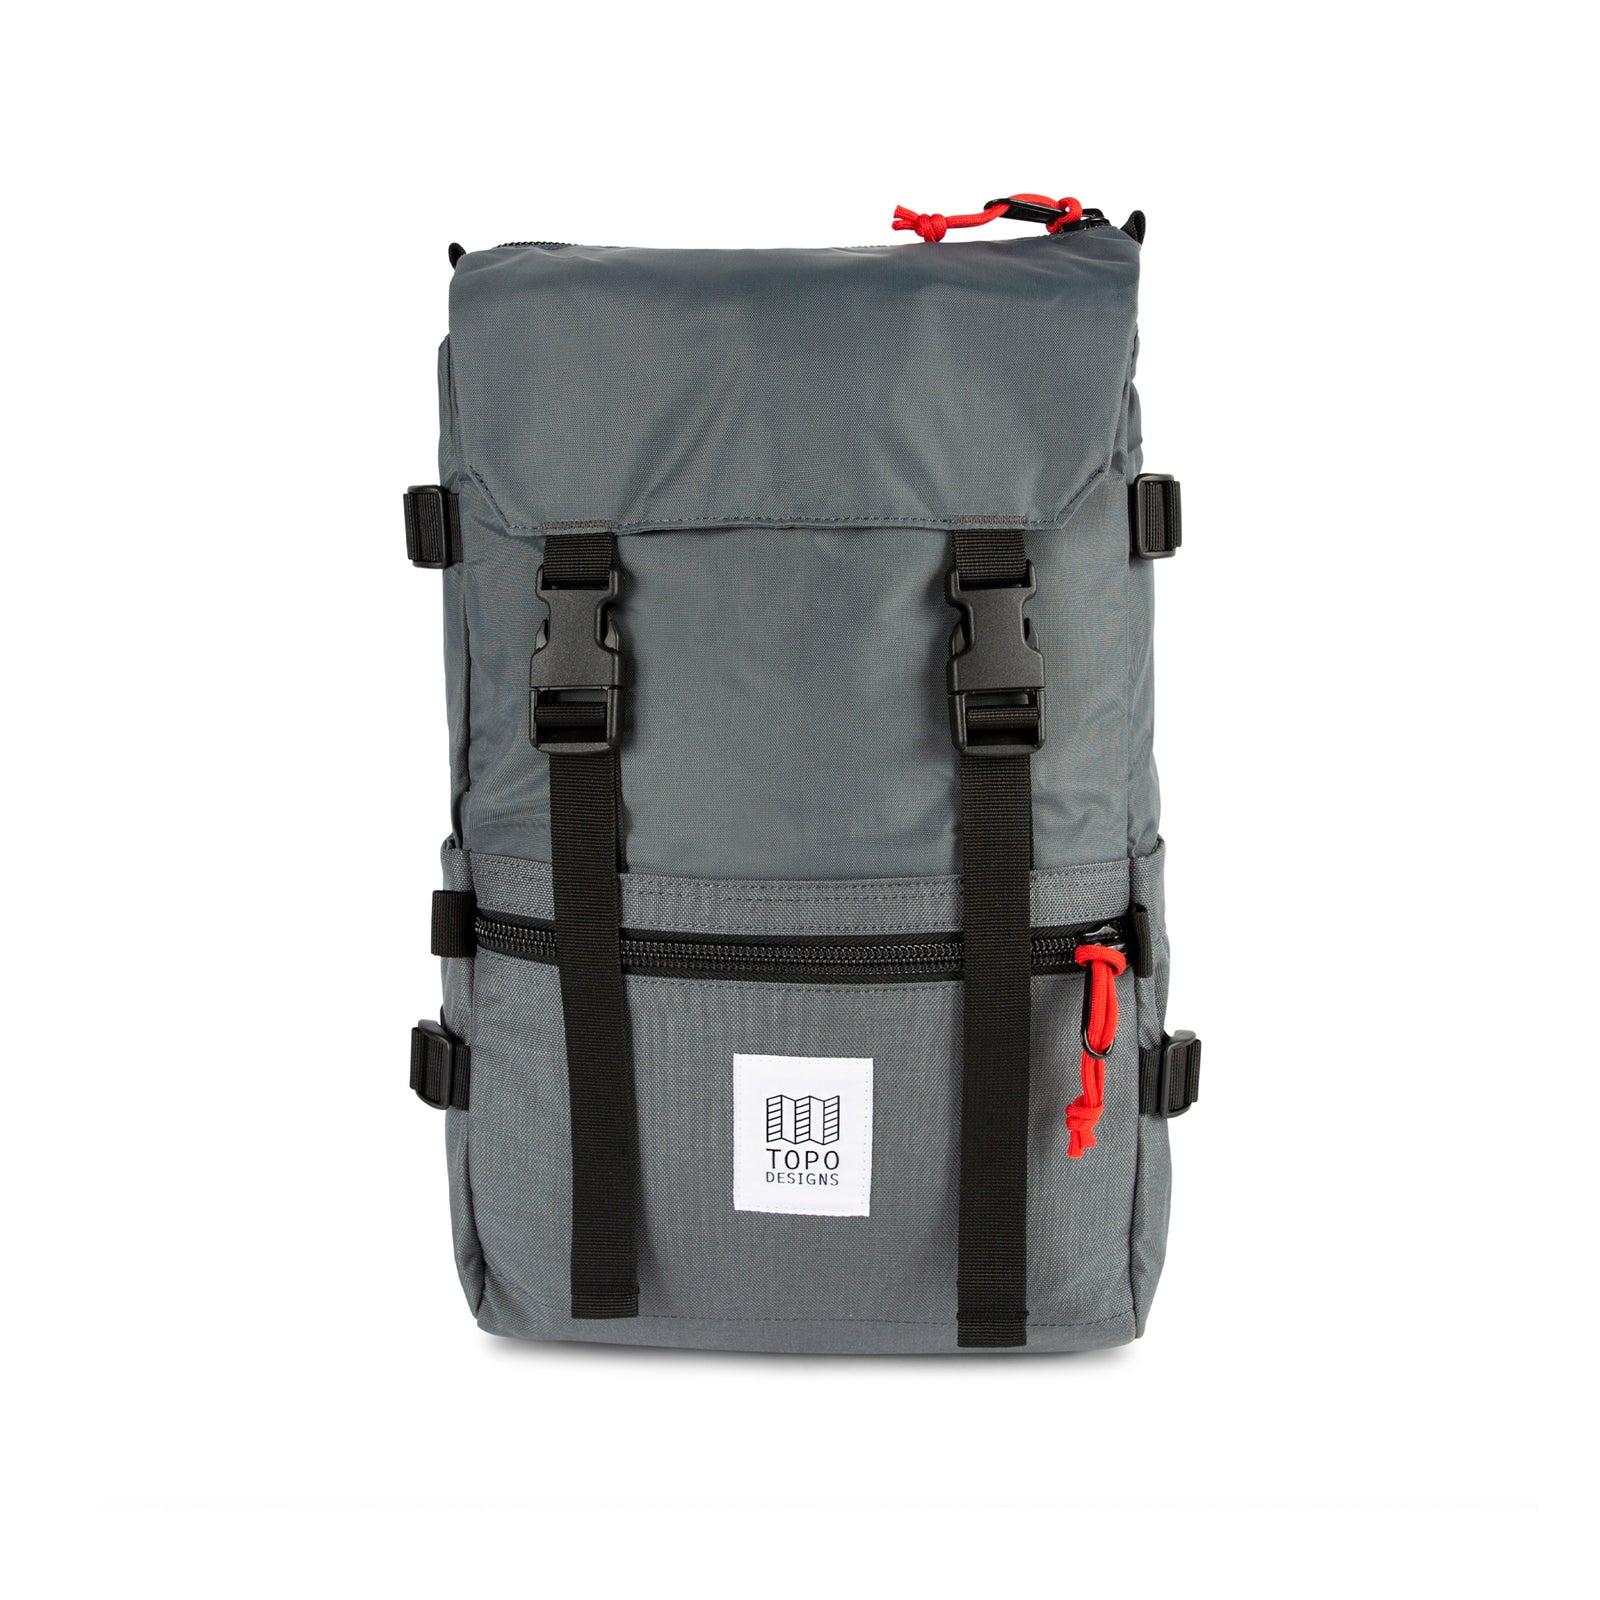 Topo Designs Rover Pack Classic laptop backpack in "Charcoal" gray.